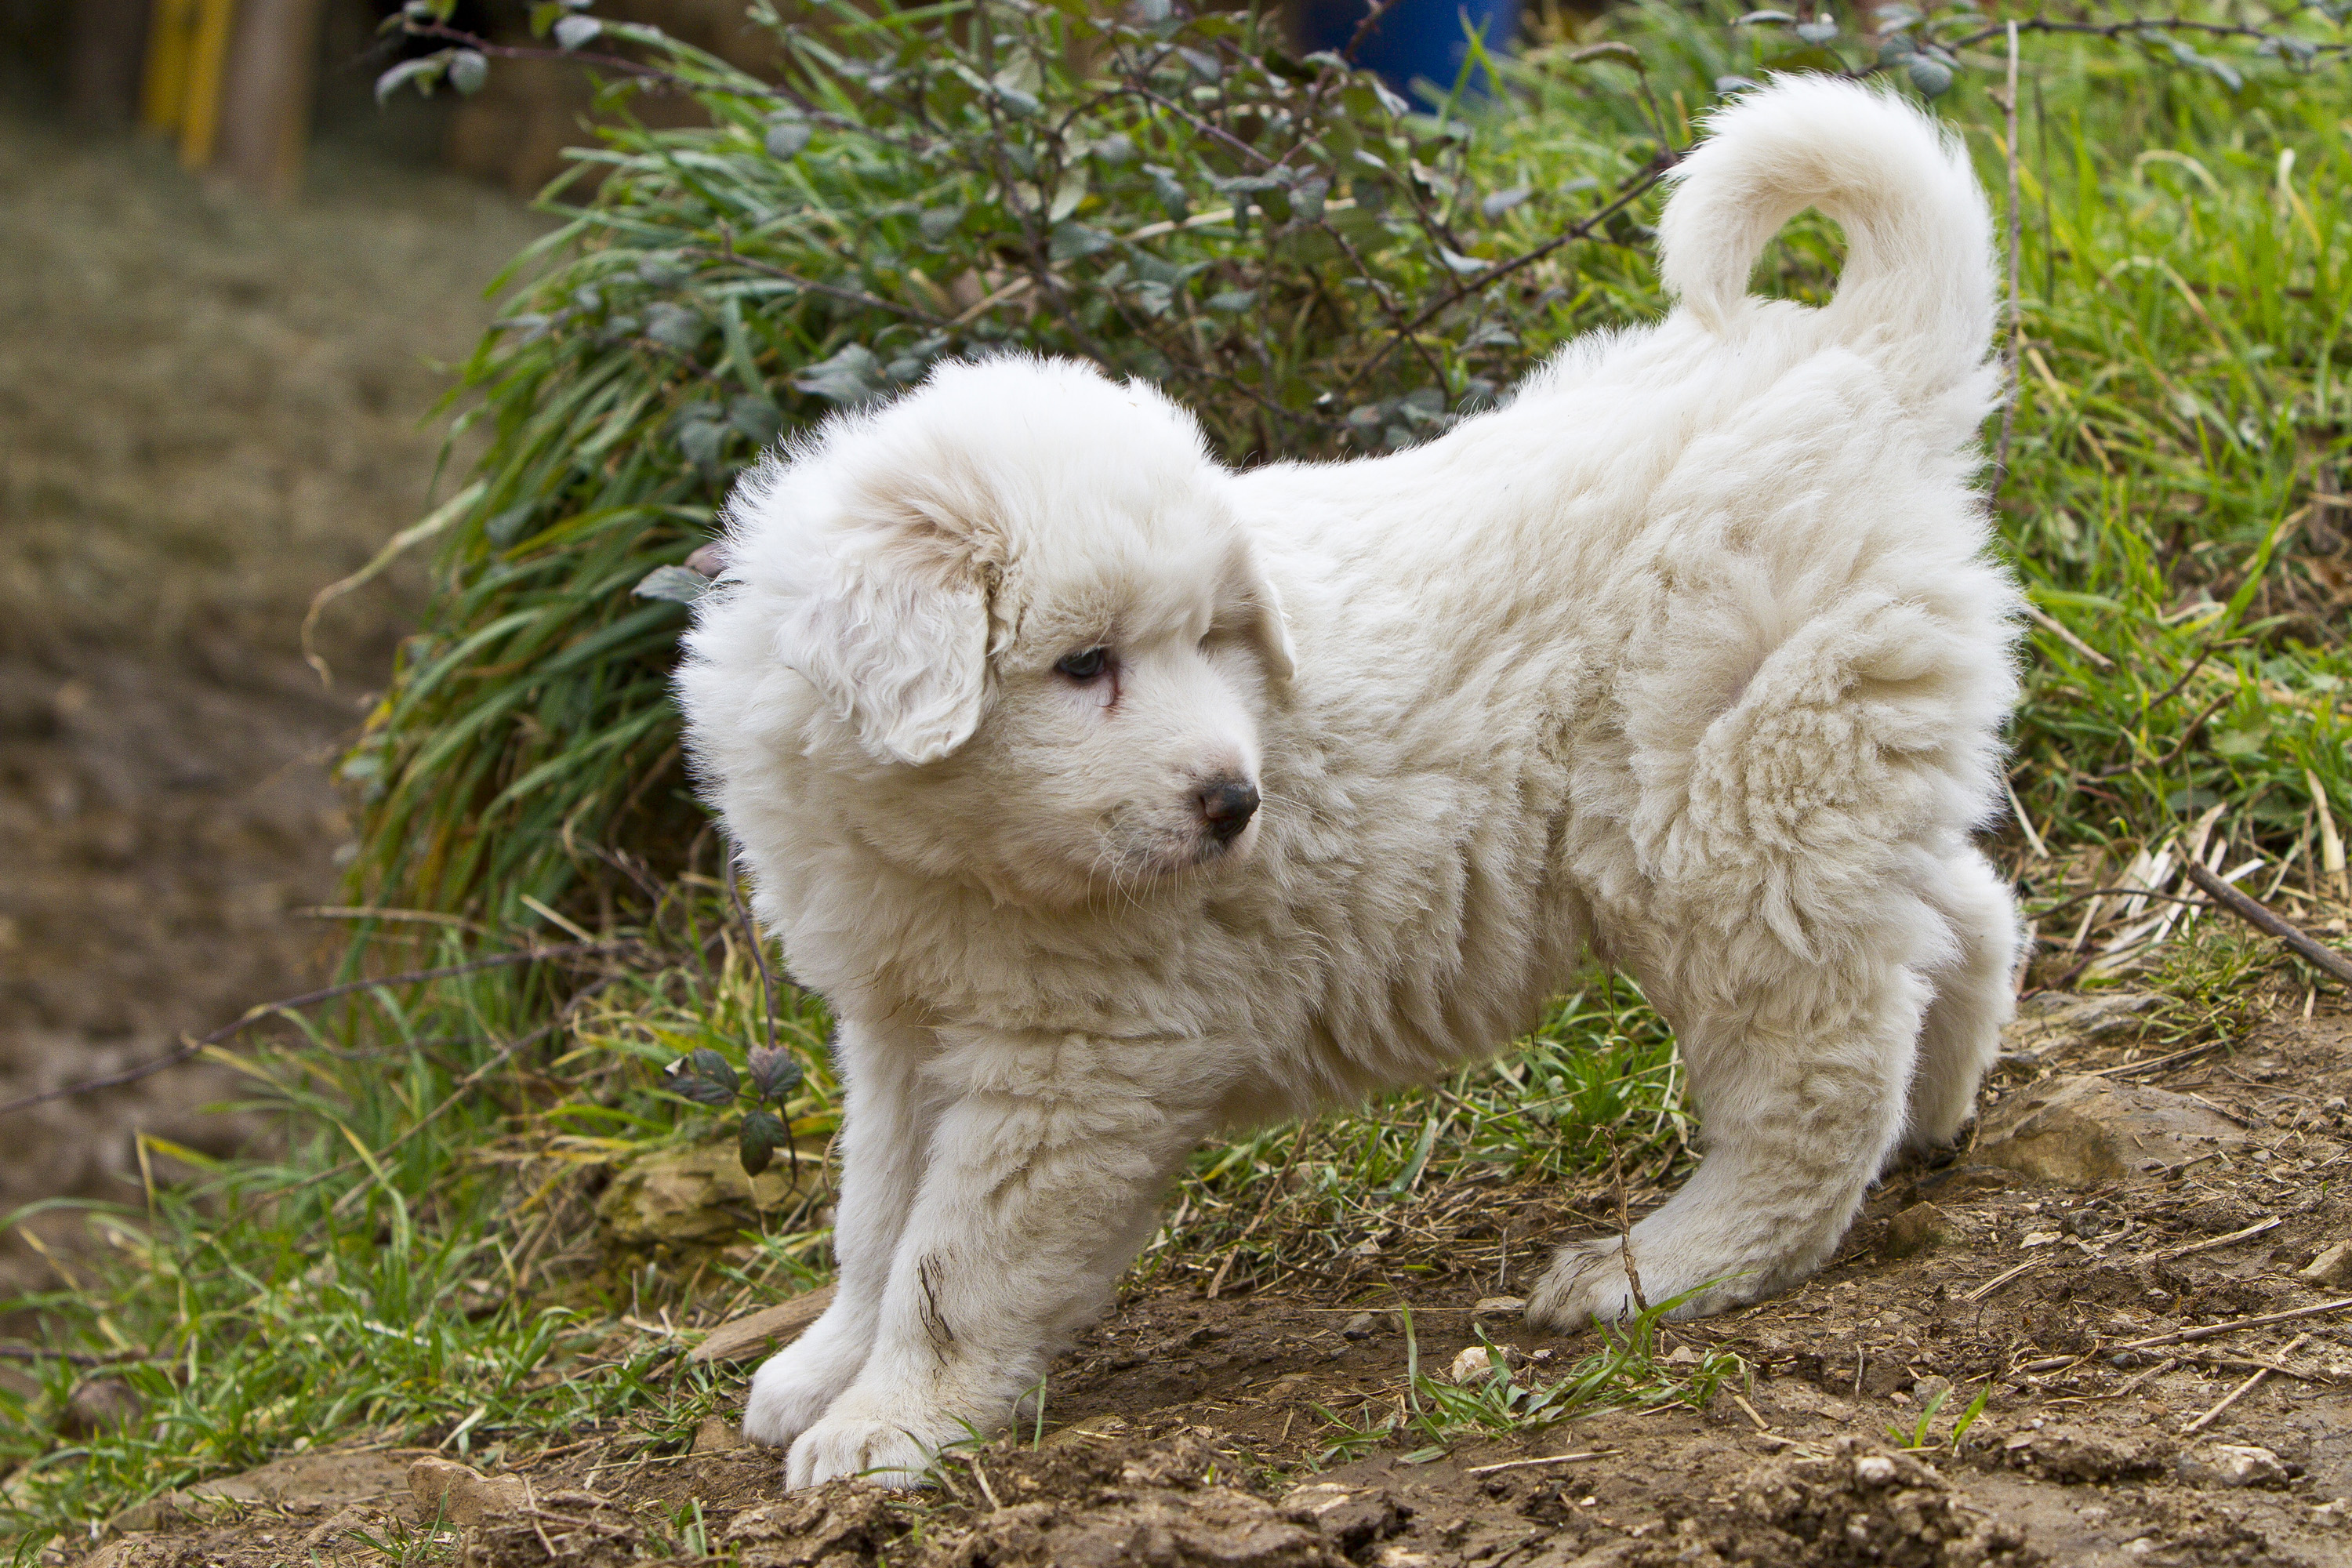 A Great Pyrenees puppy | Source: Getty Images